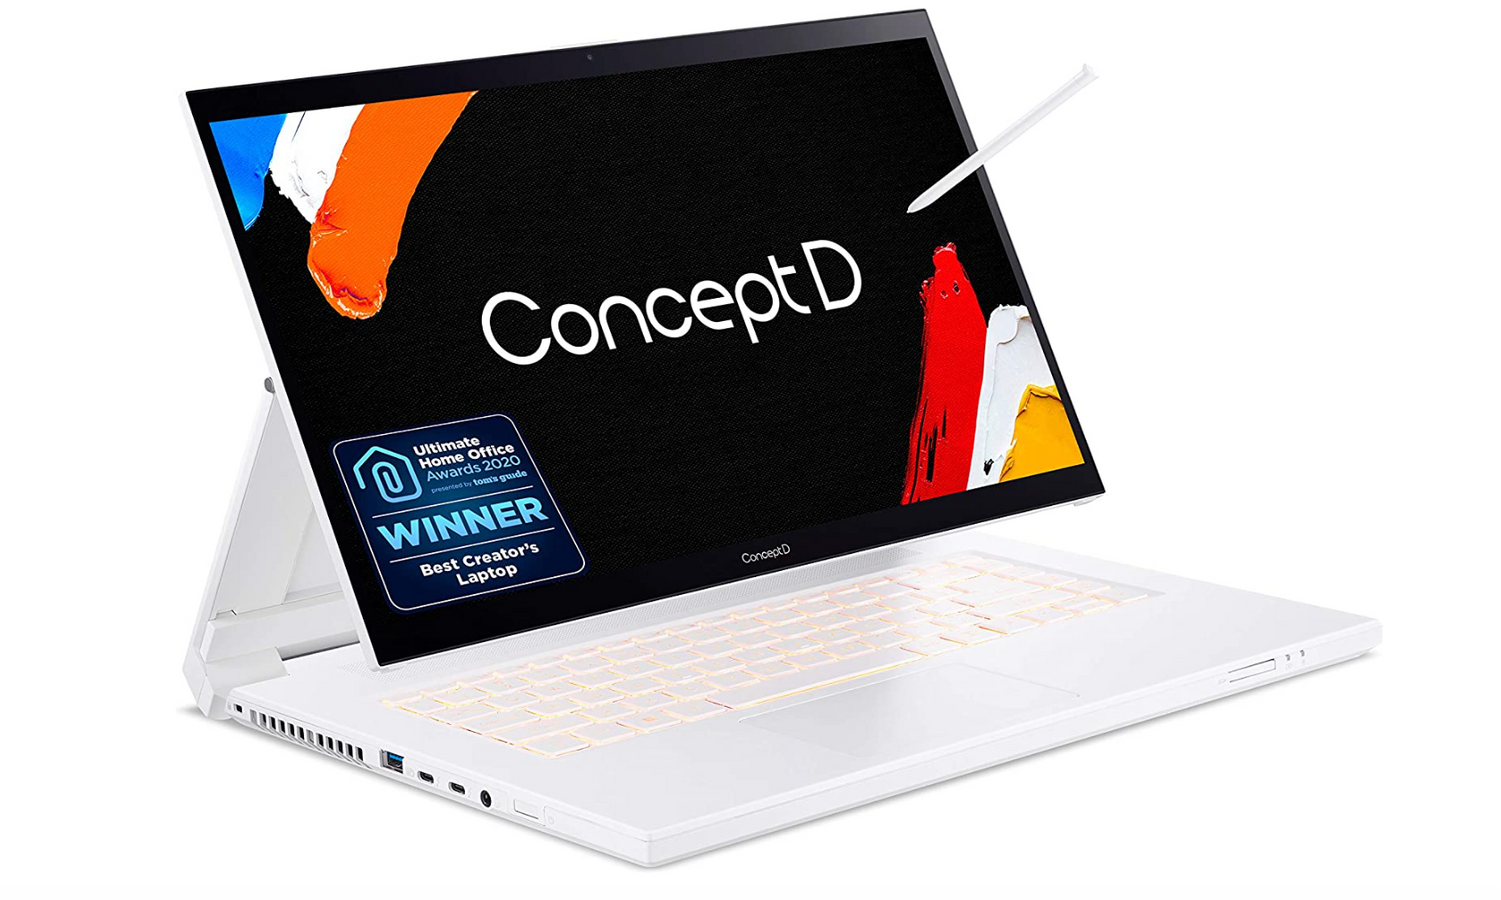 Acer ConceptD Ezel 7 product image of a folded white laptop with a stylus being used on the screen.